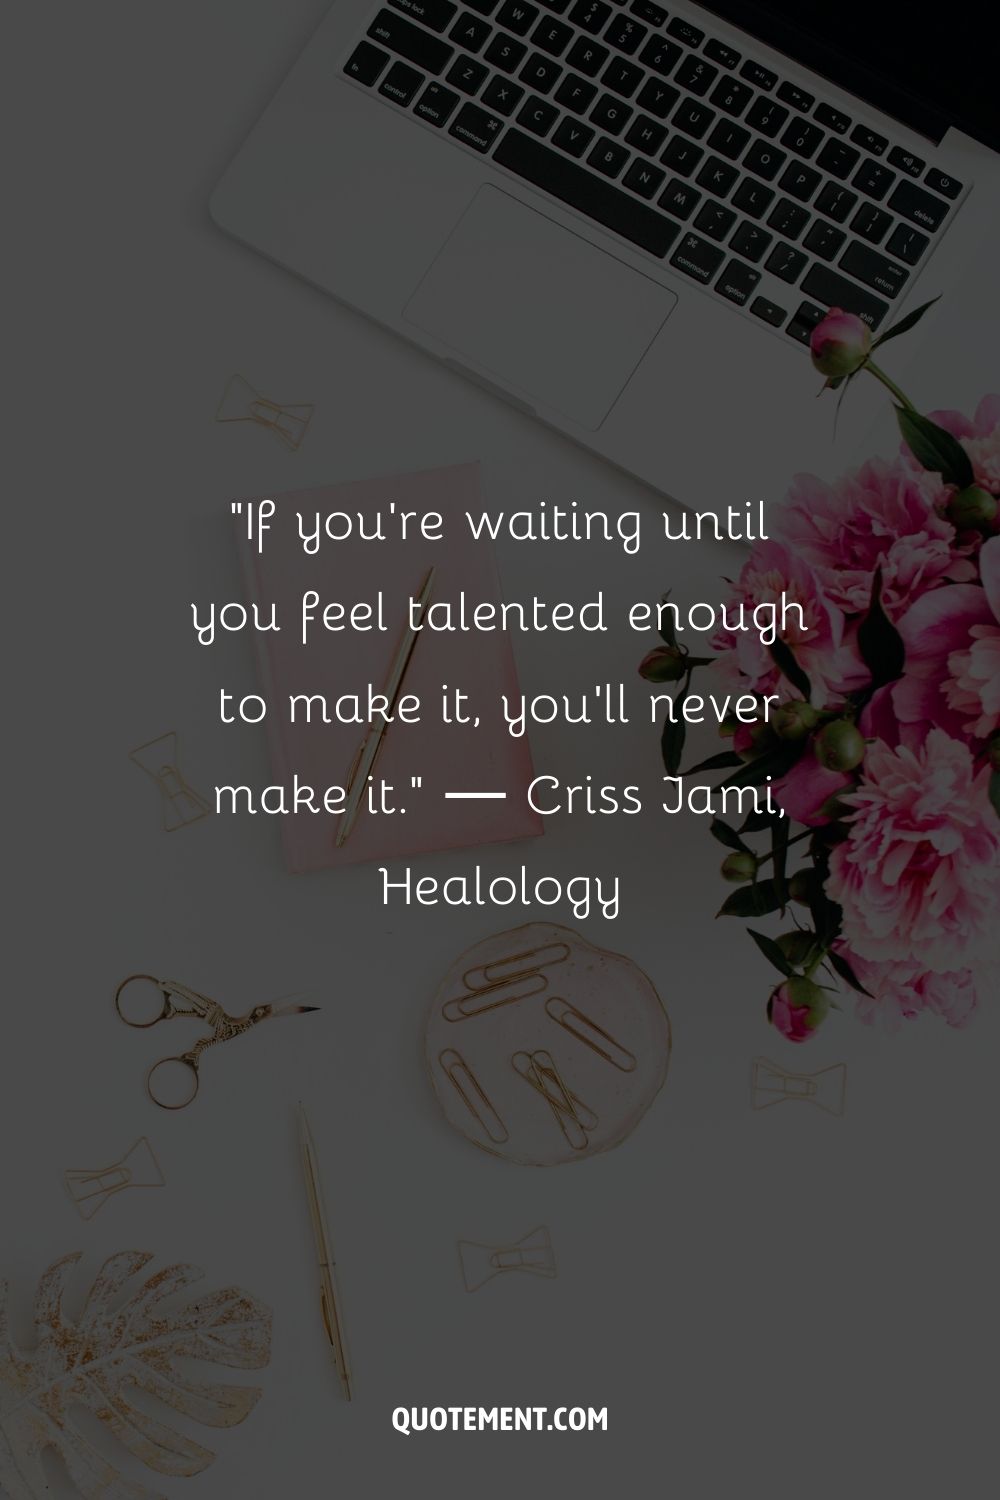 “If you're waiting until you feel talented enough to make it, you'll never make it.” ― Criss Jami, Healology